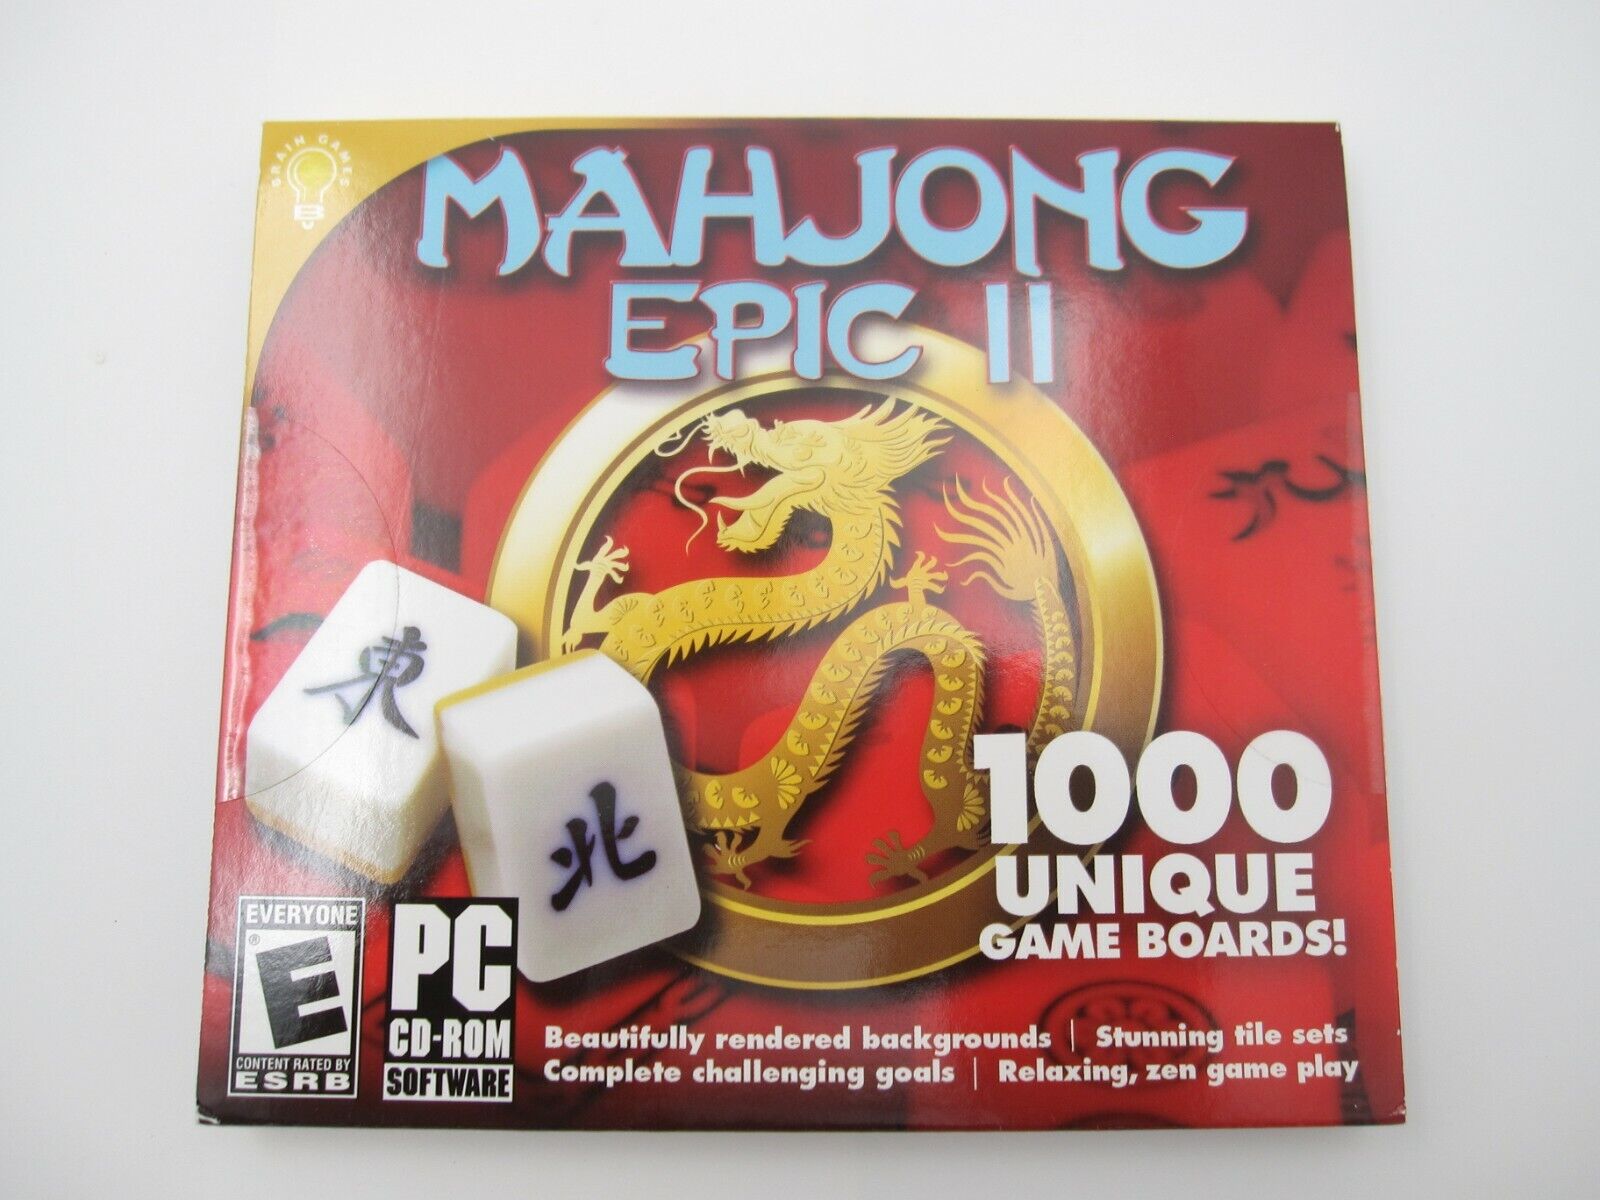 New Sealed Mahjon Epic II 1000 Unique Game Boards PC CD Rom Game (Rated E)